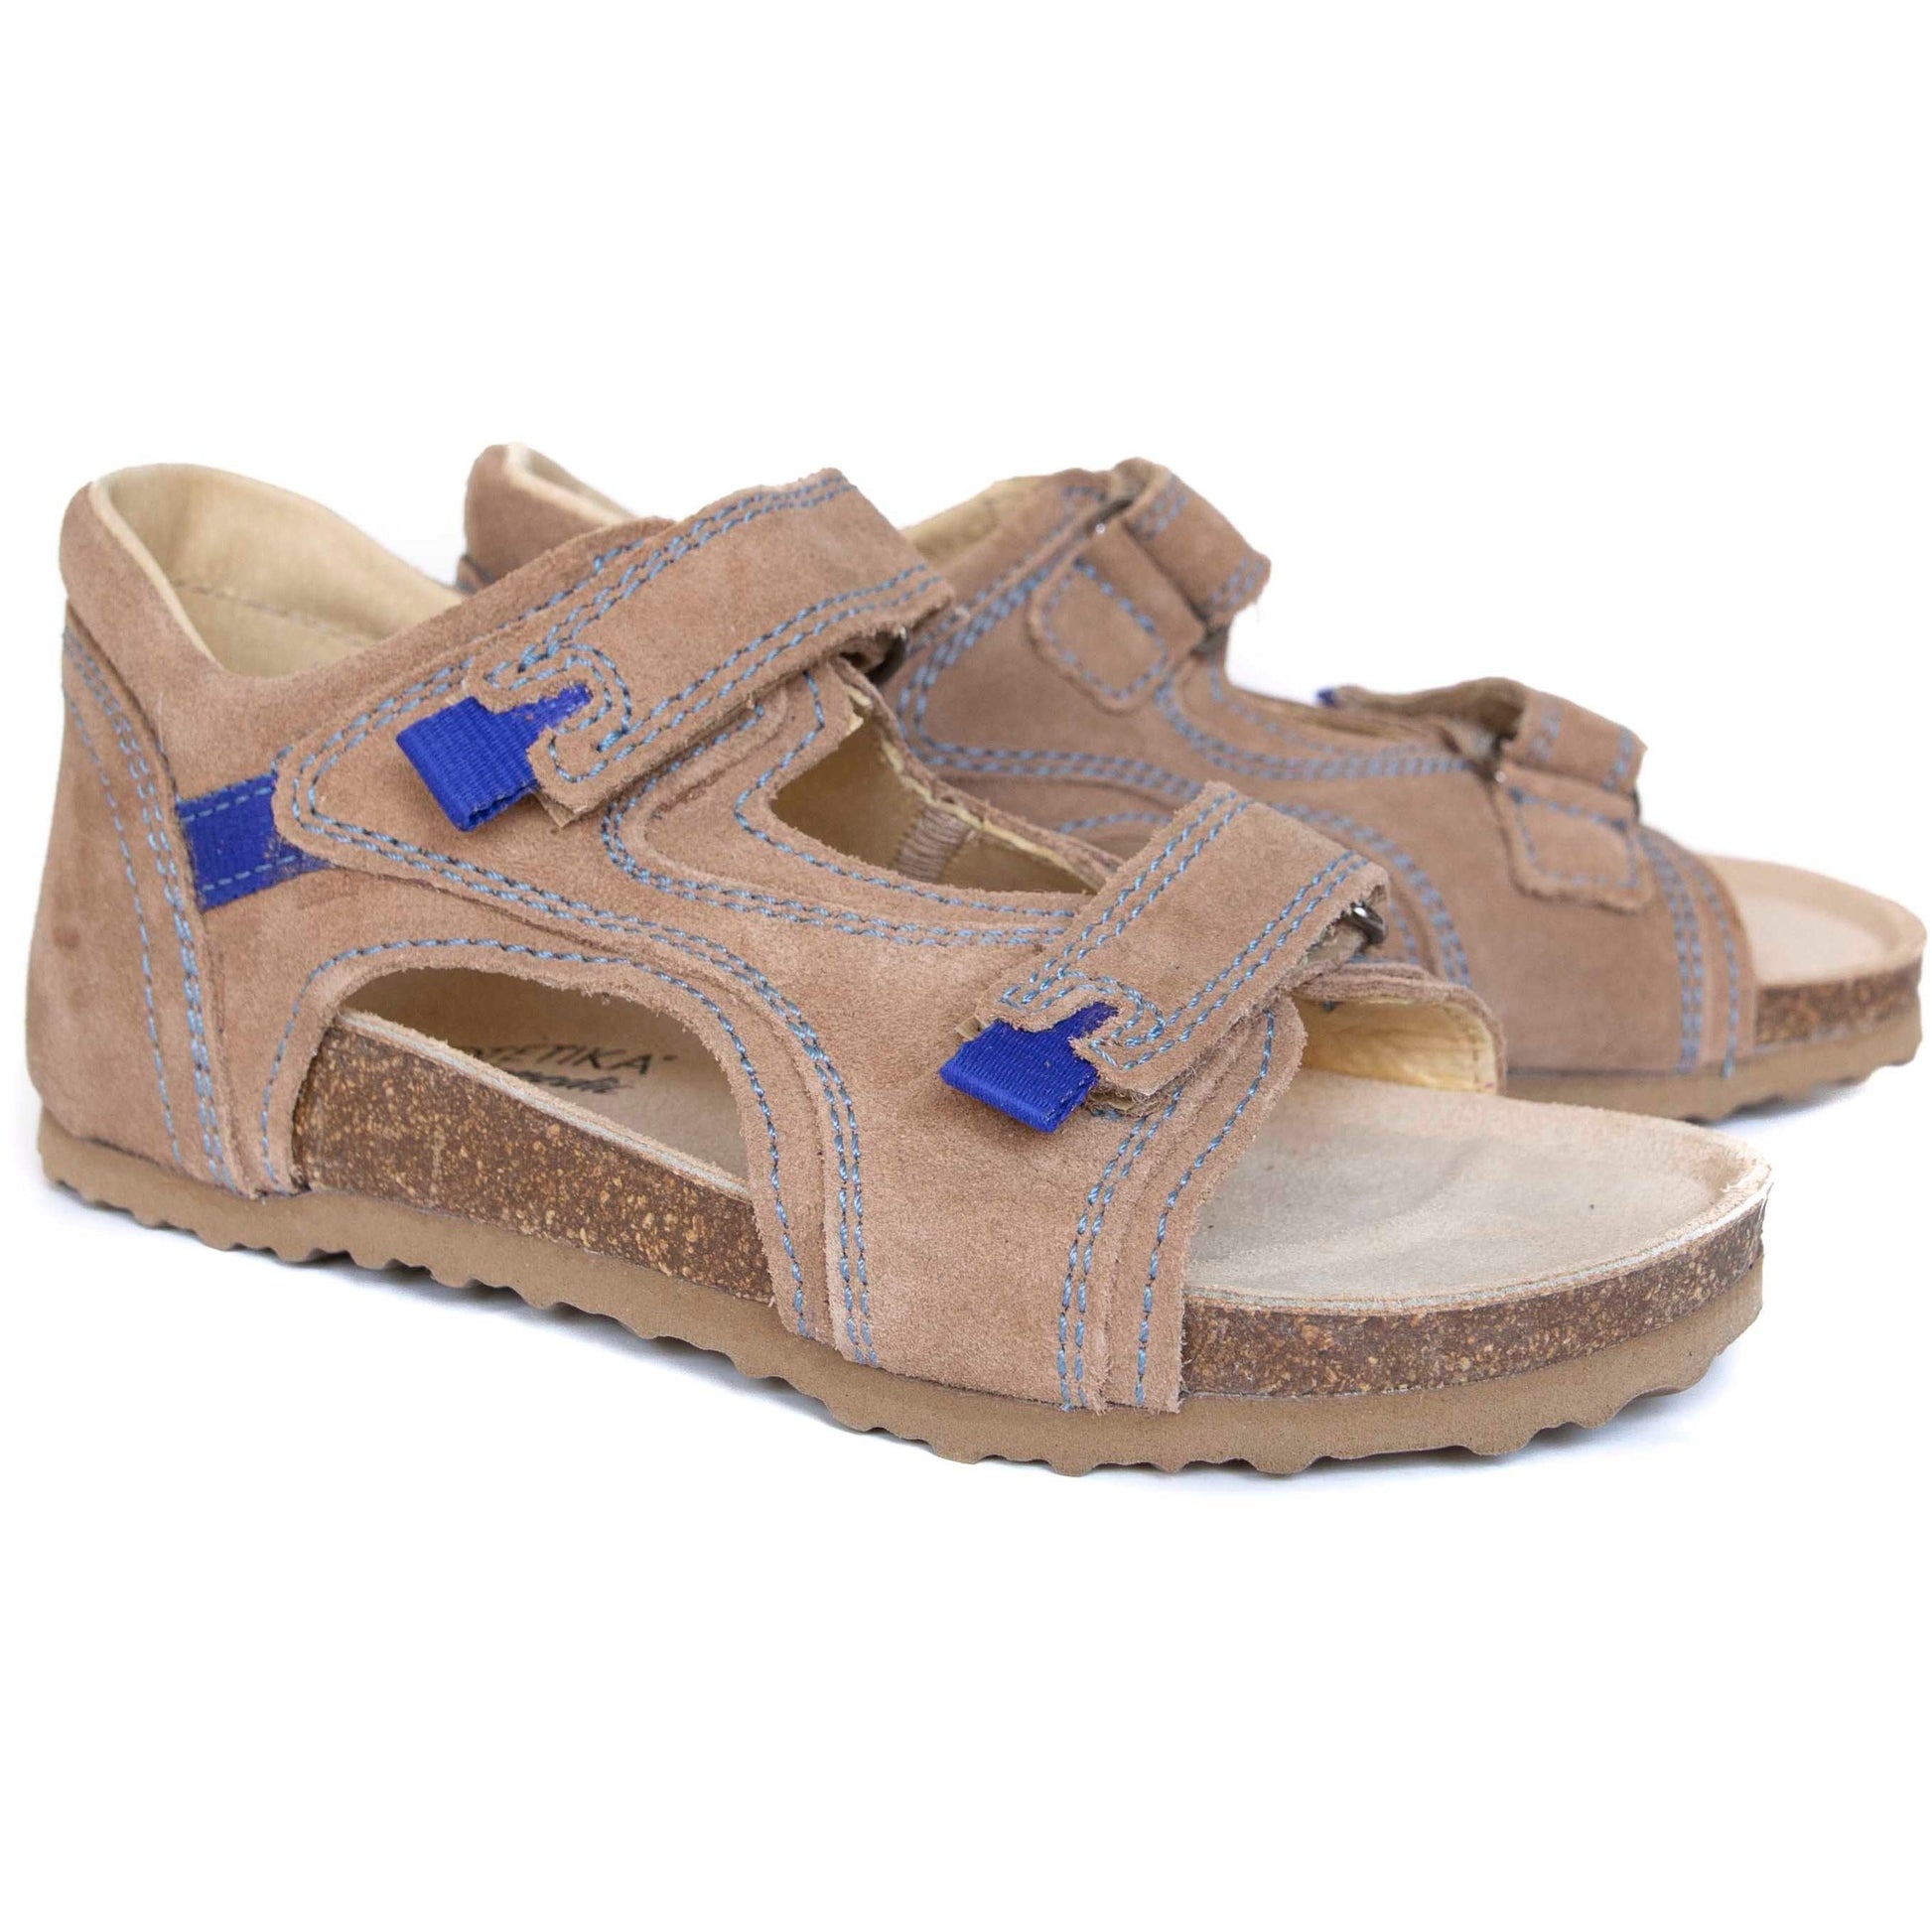 orthopedic older boys sandals  with closed solid heel: T32: color brown - feelgoodshoes.ae